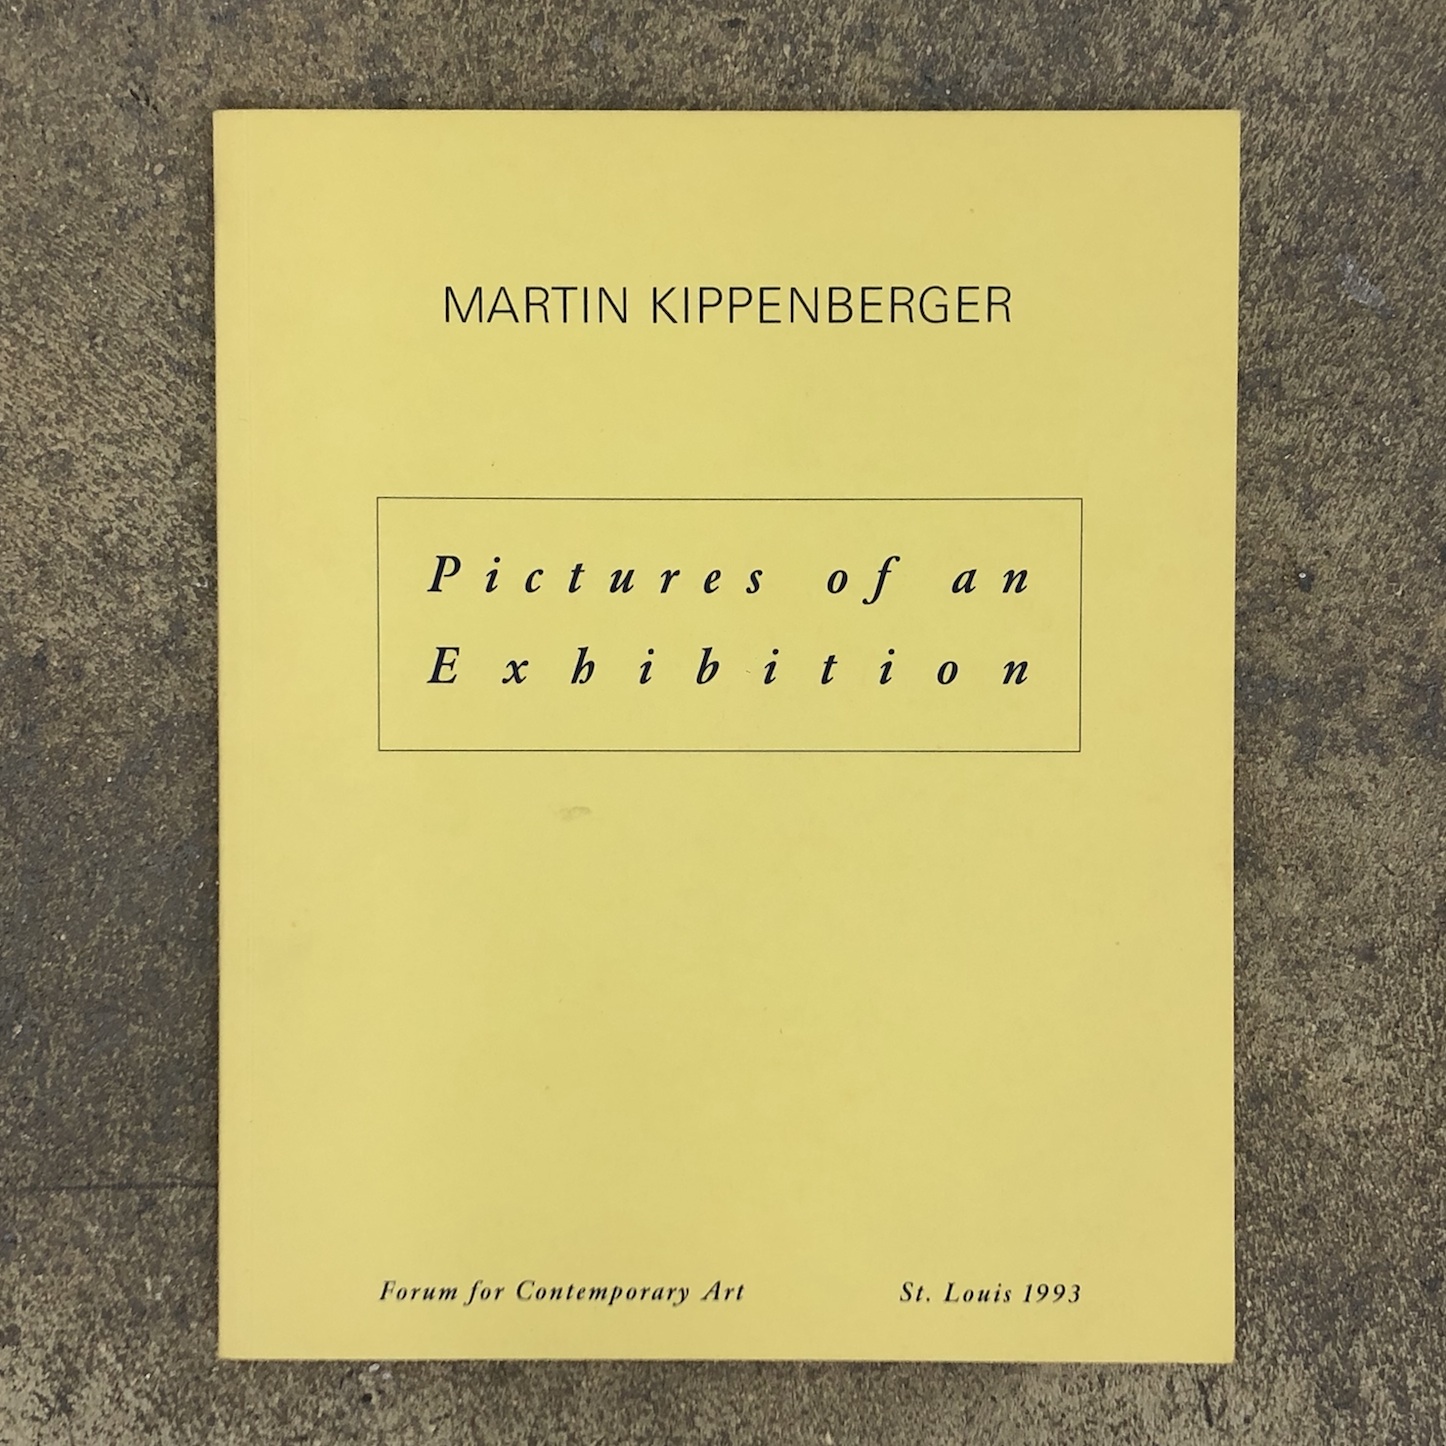 Pictures of an exhibition